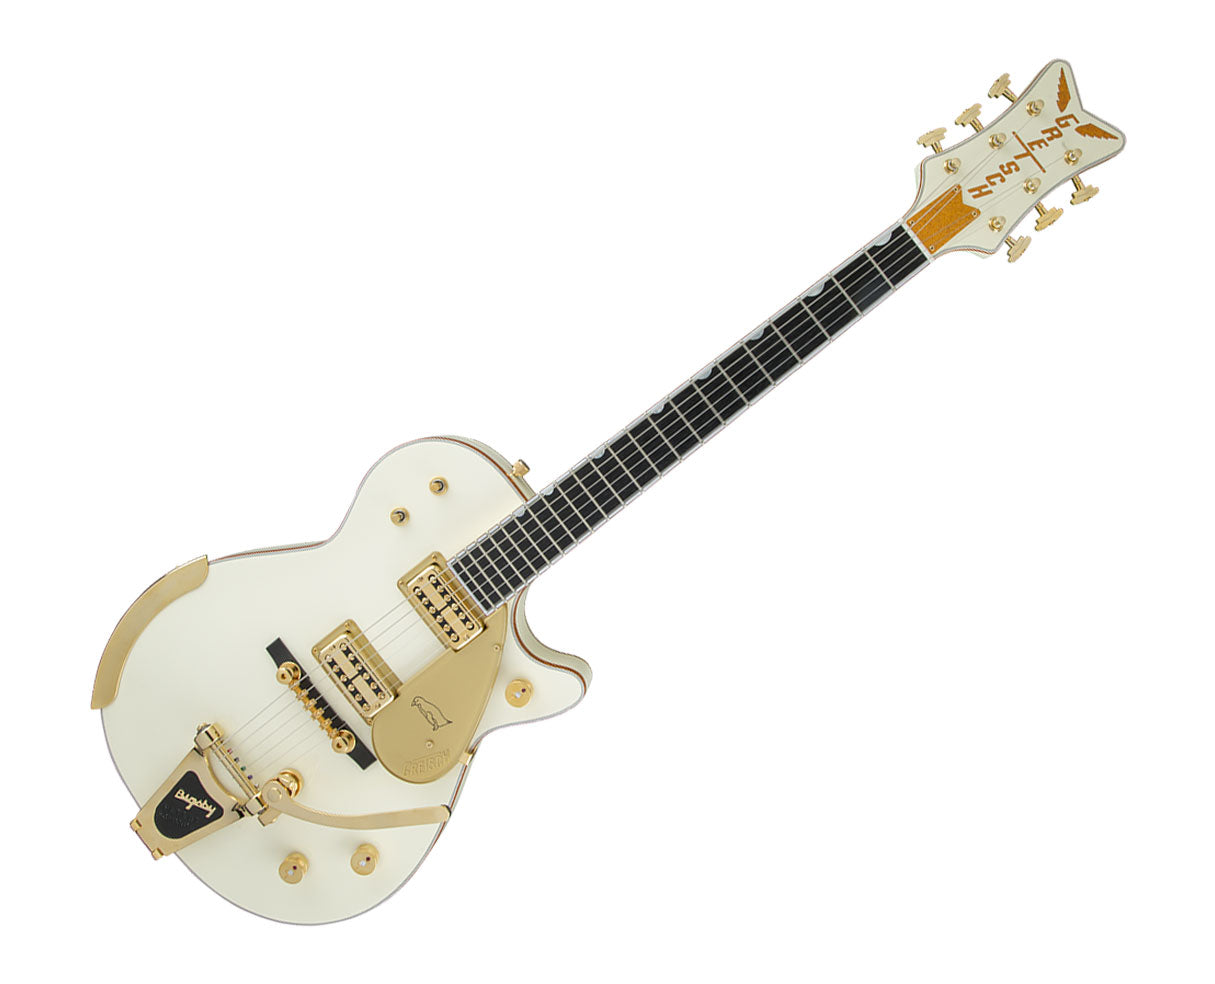 Gretsch G6134T-58 Vintage Select '58 Penguin Hollow-Body Electric Guitar - Vintage White